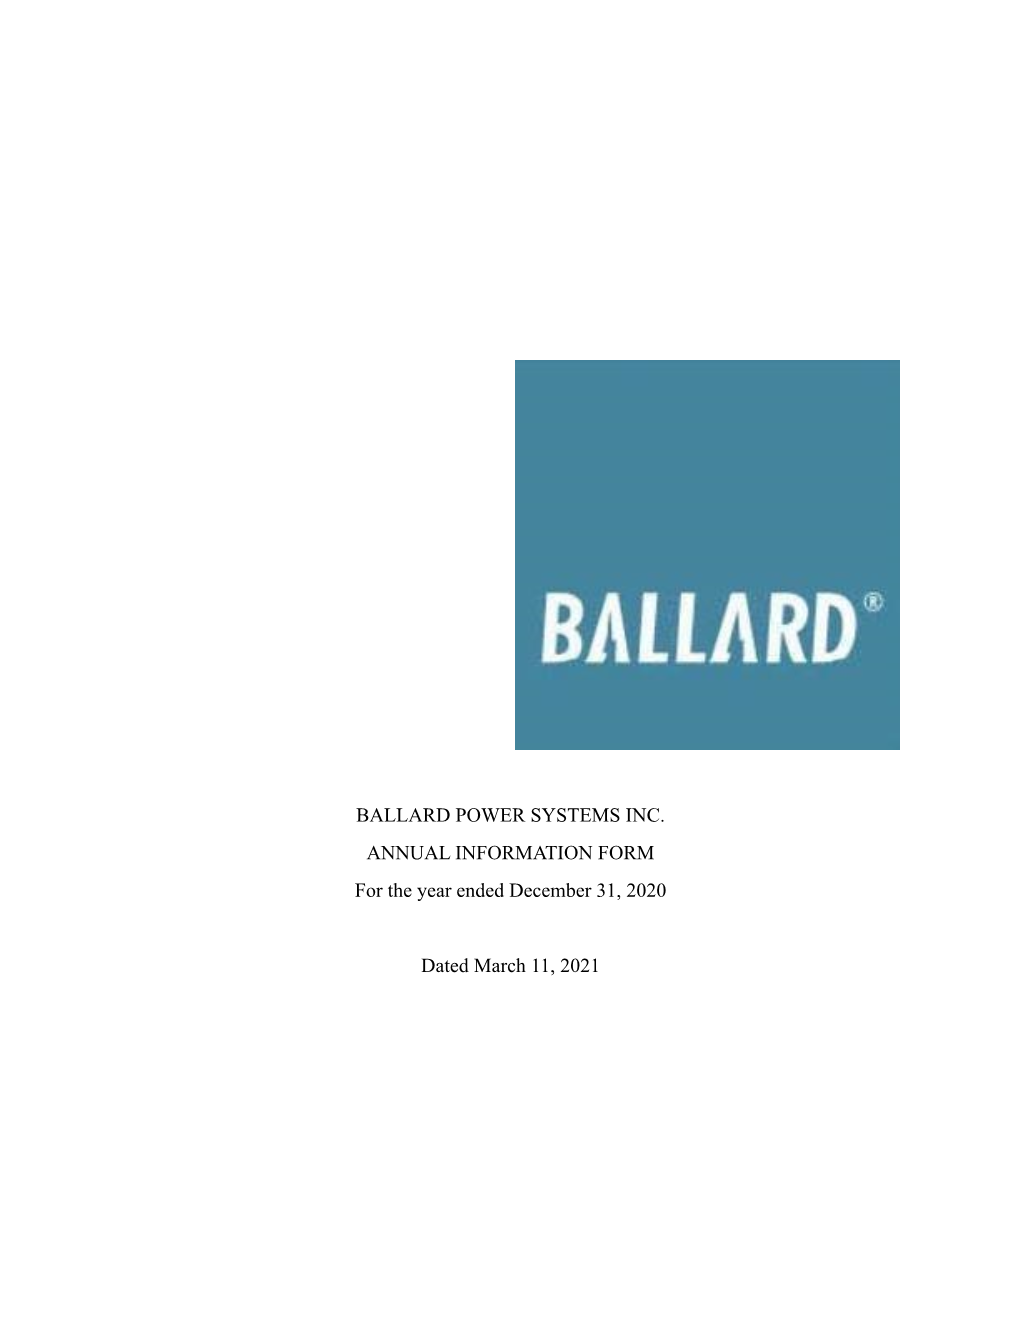 BALLARD POWER SYSTEMS INC. ANNUAL INFORMATION FORM for the Year Ended December 31, 2020 Dated March 11, 2021